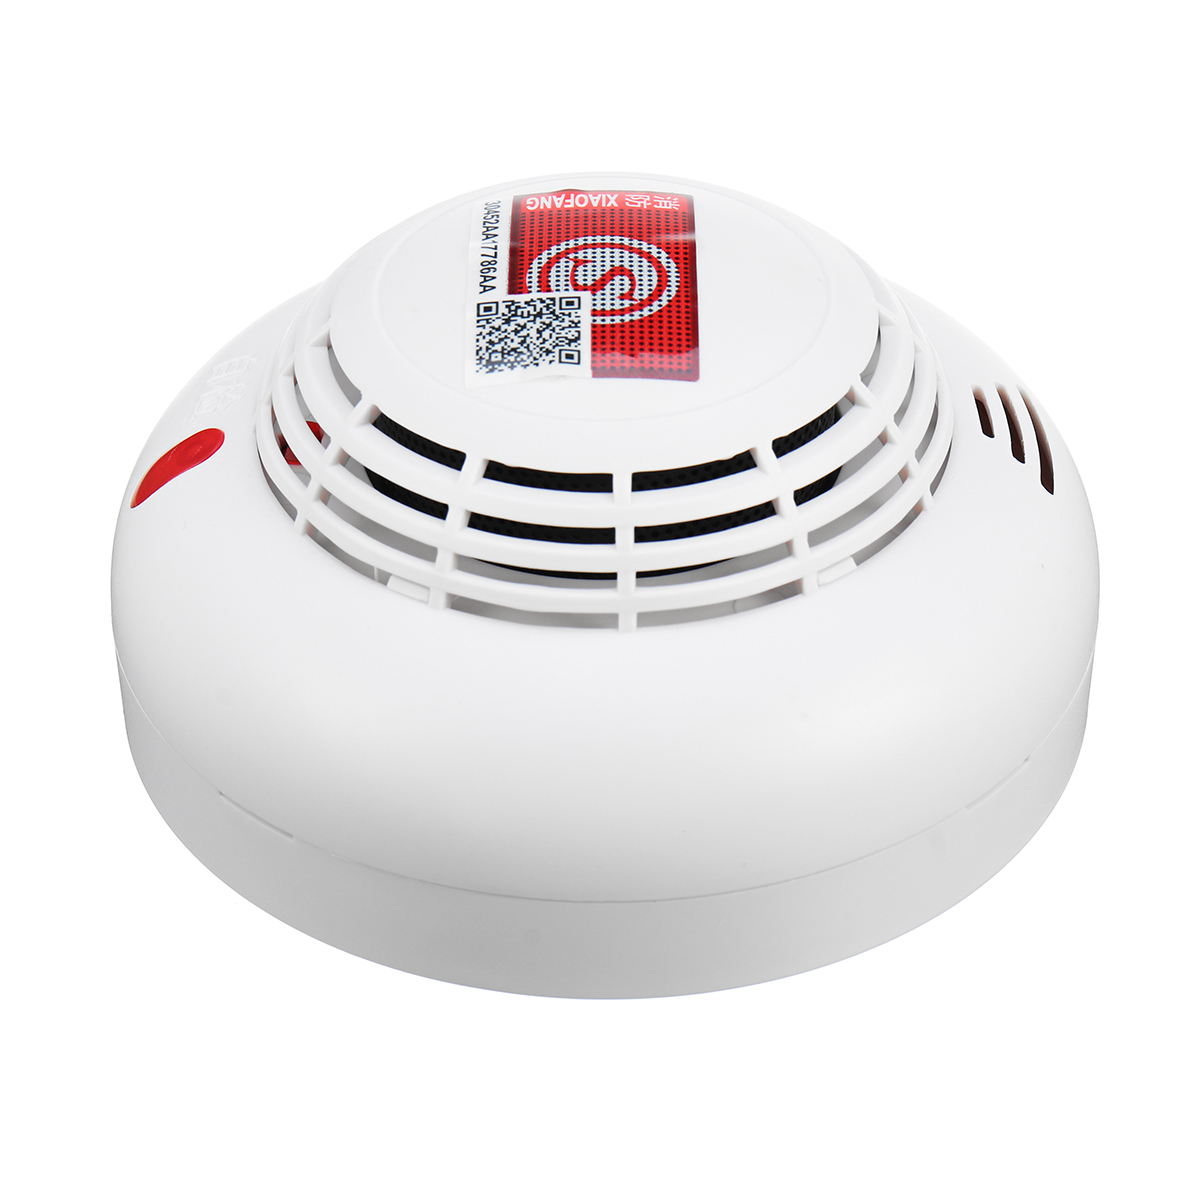 

Smoke Detector Home Security Fire Alarm Photoelectric Sensor Battery Operated